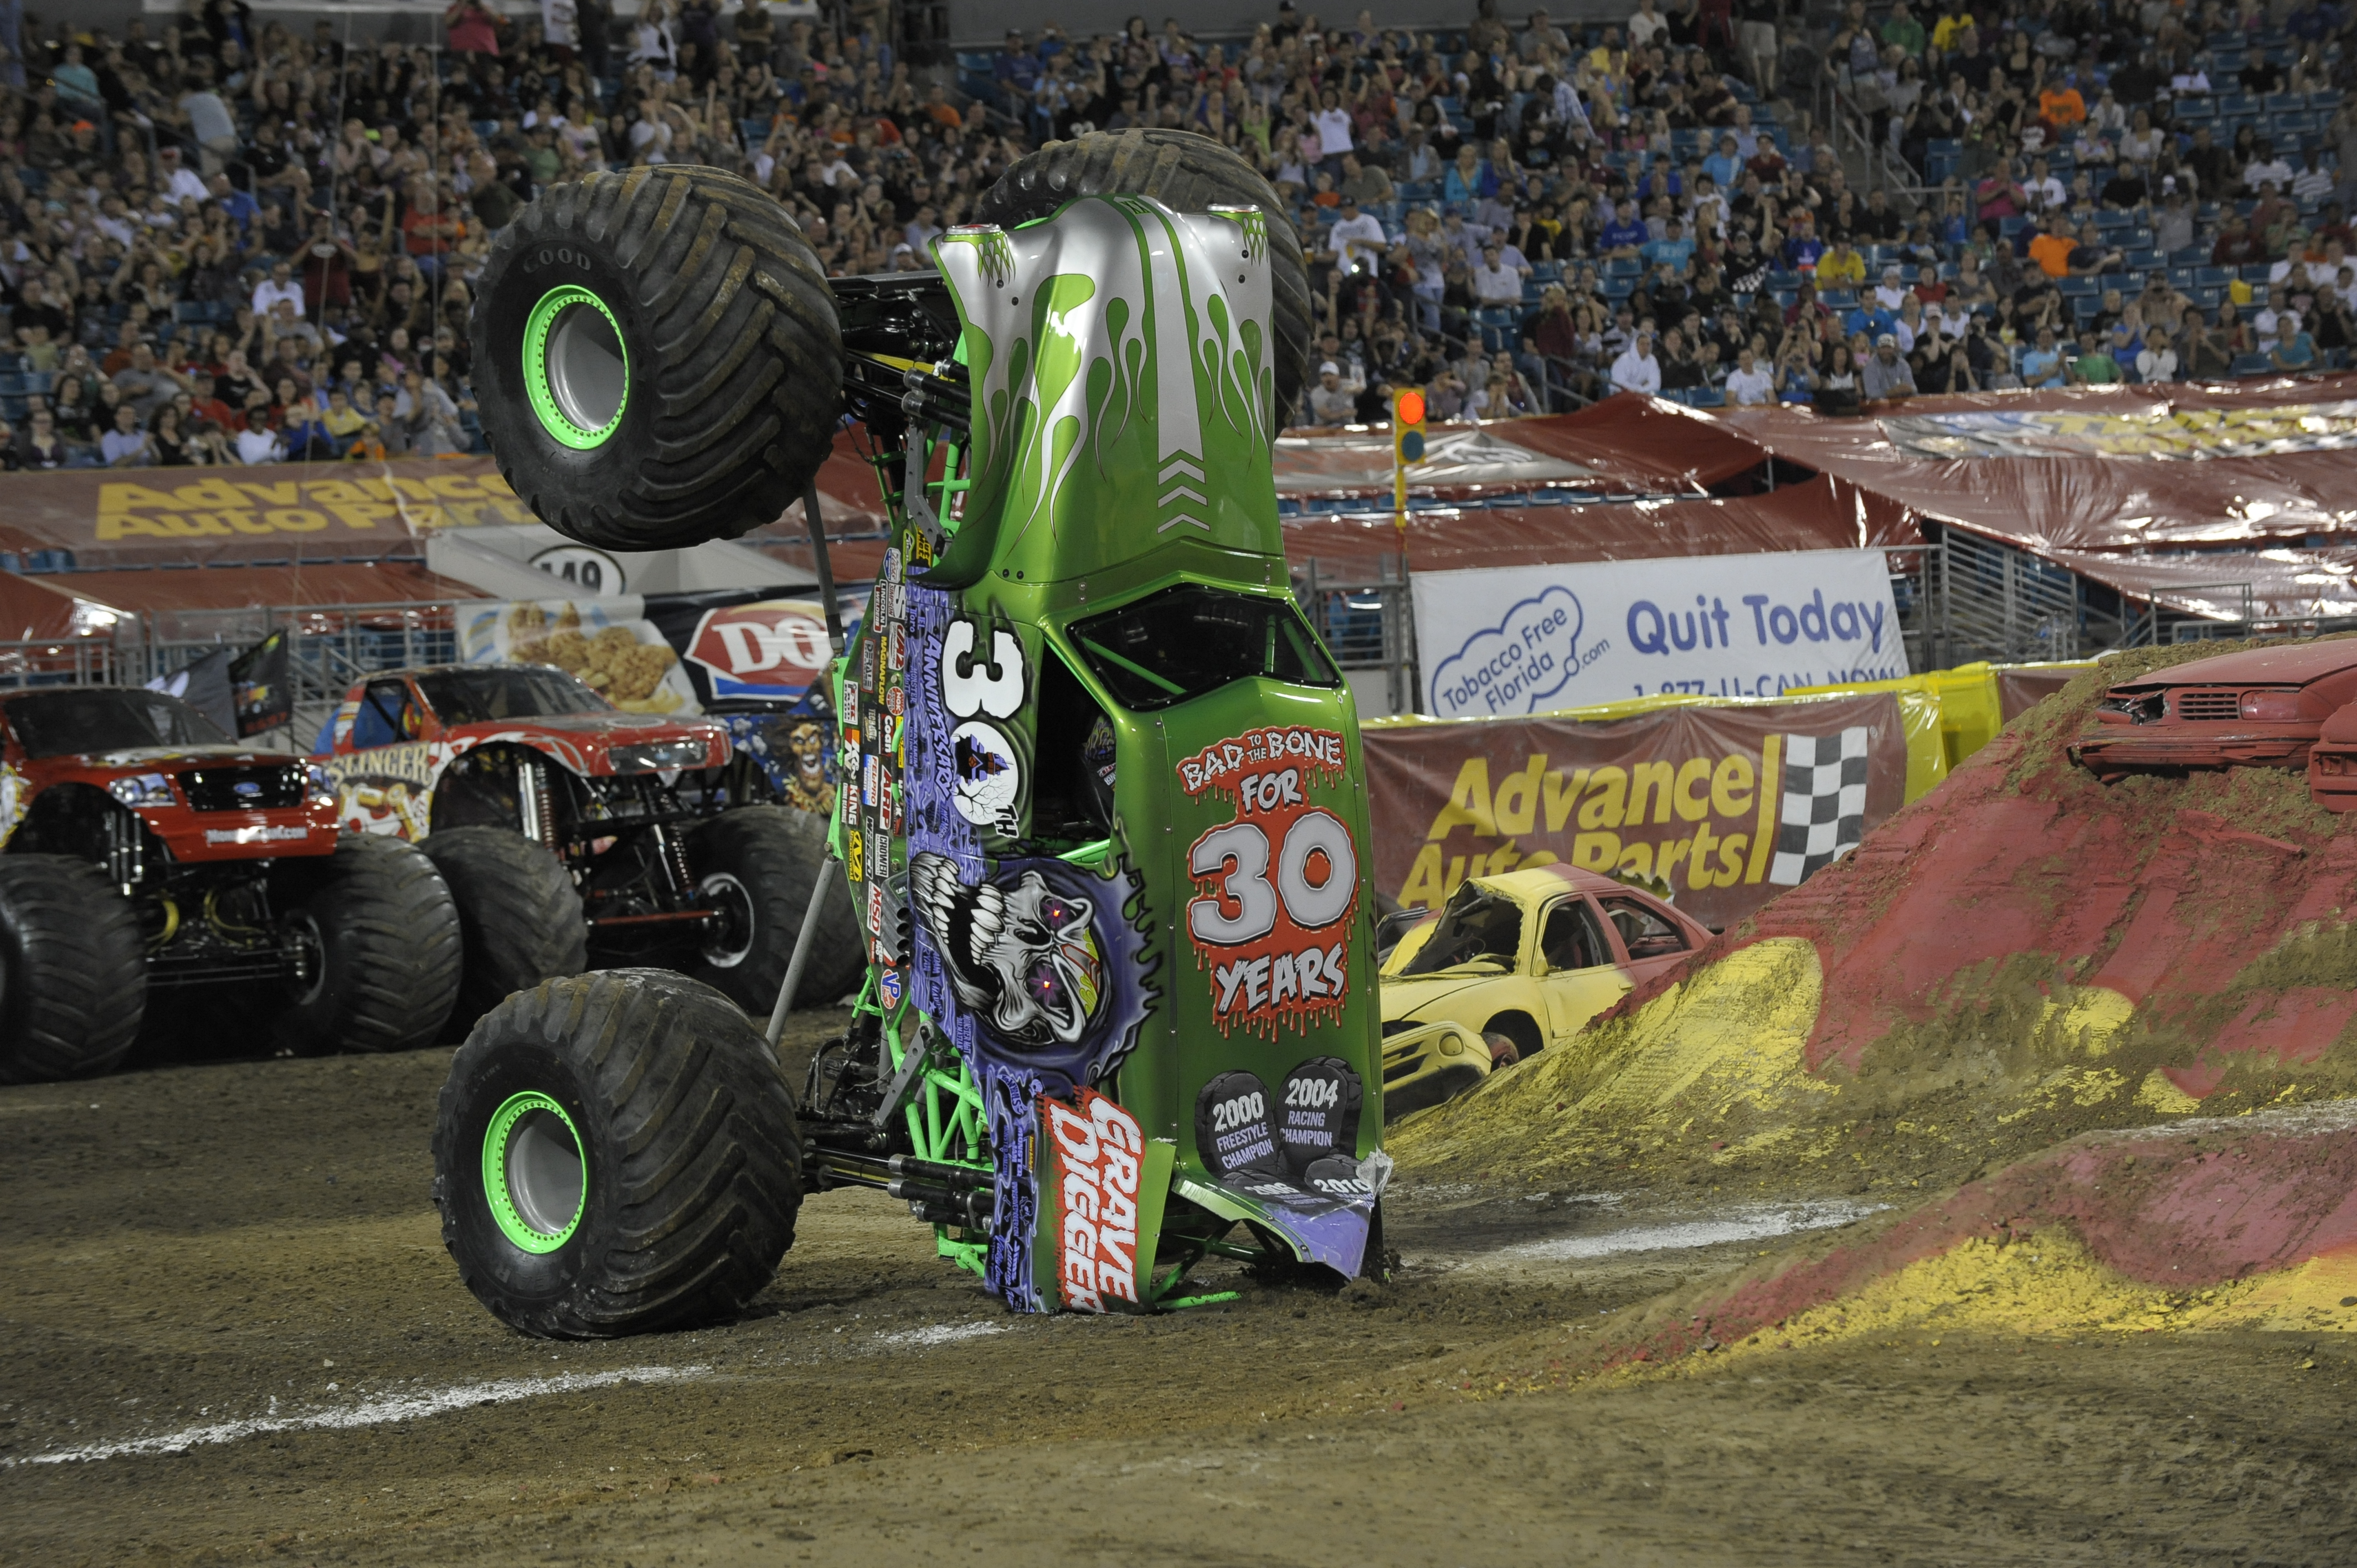 MONSTER JAM! is coming to Cincinnati win tickets to the show!! All In A Days WorkAll In A